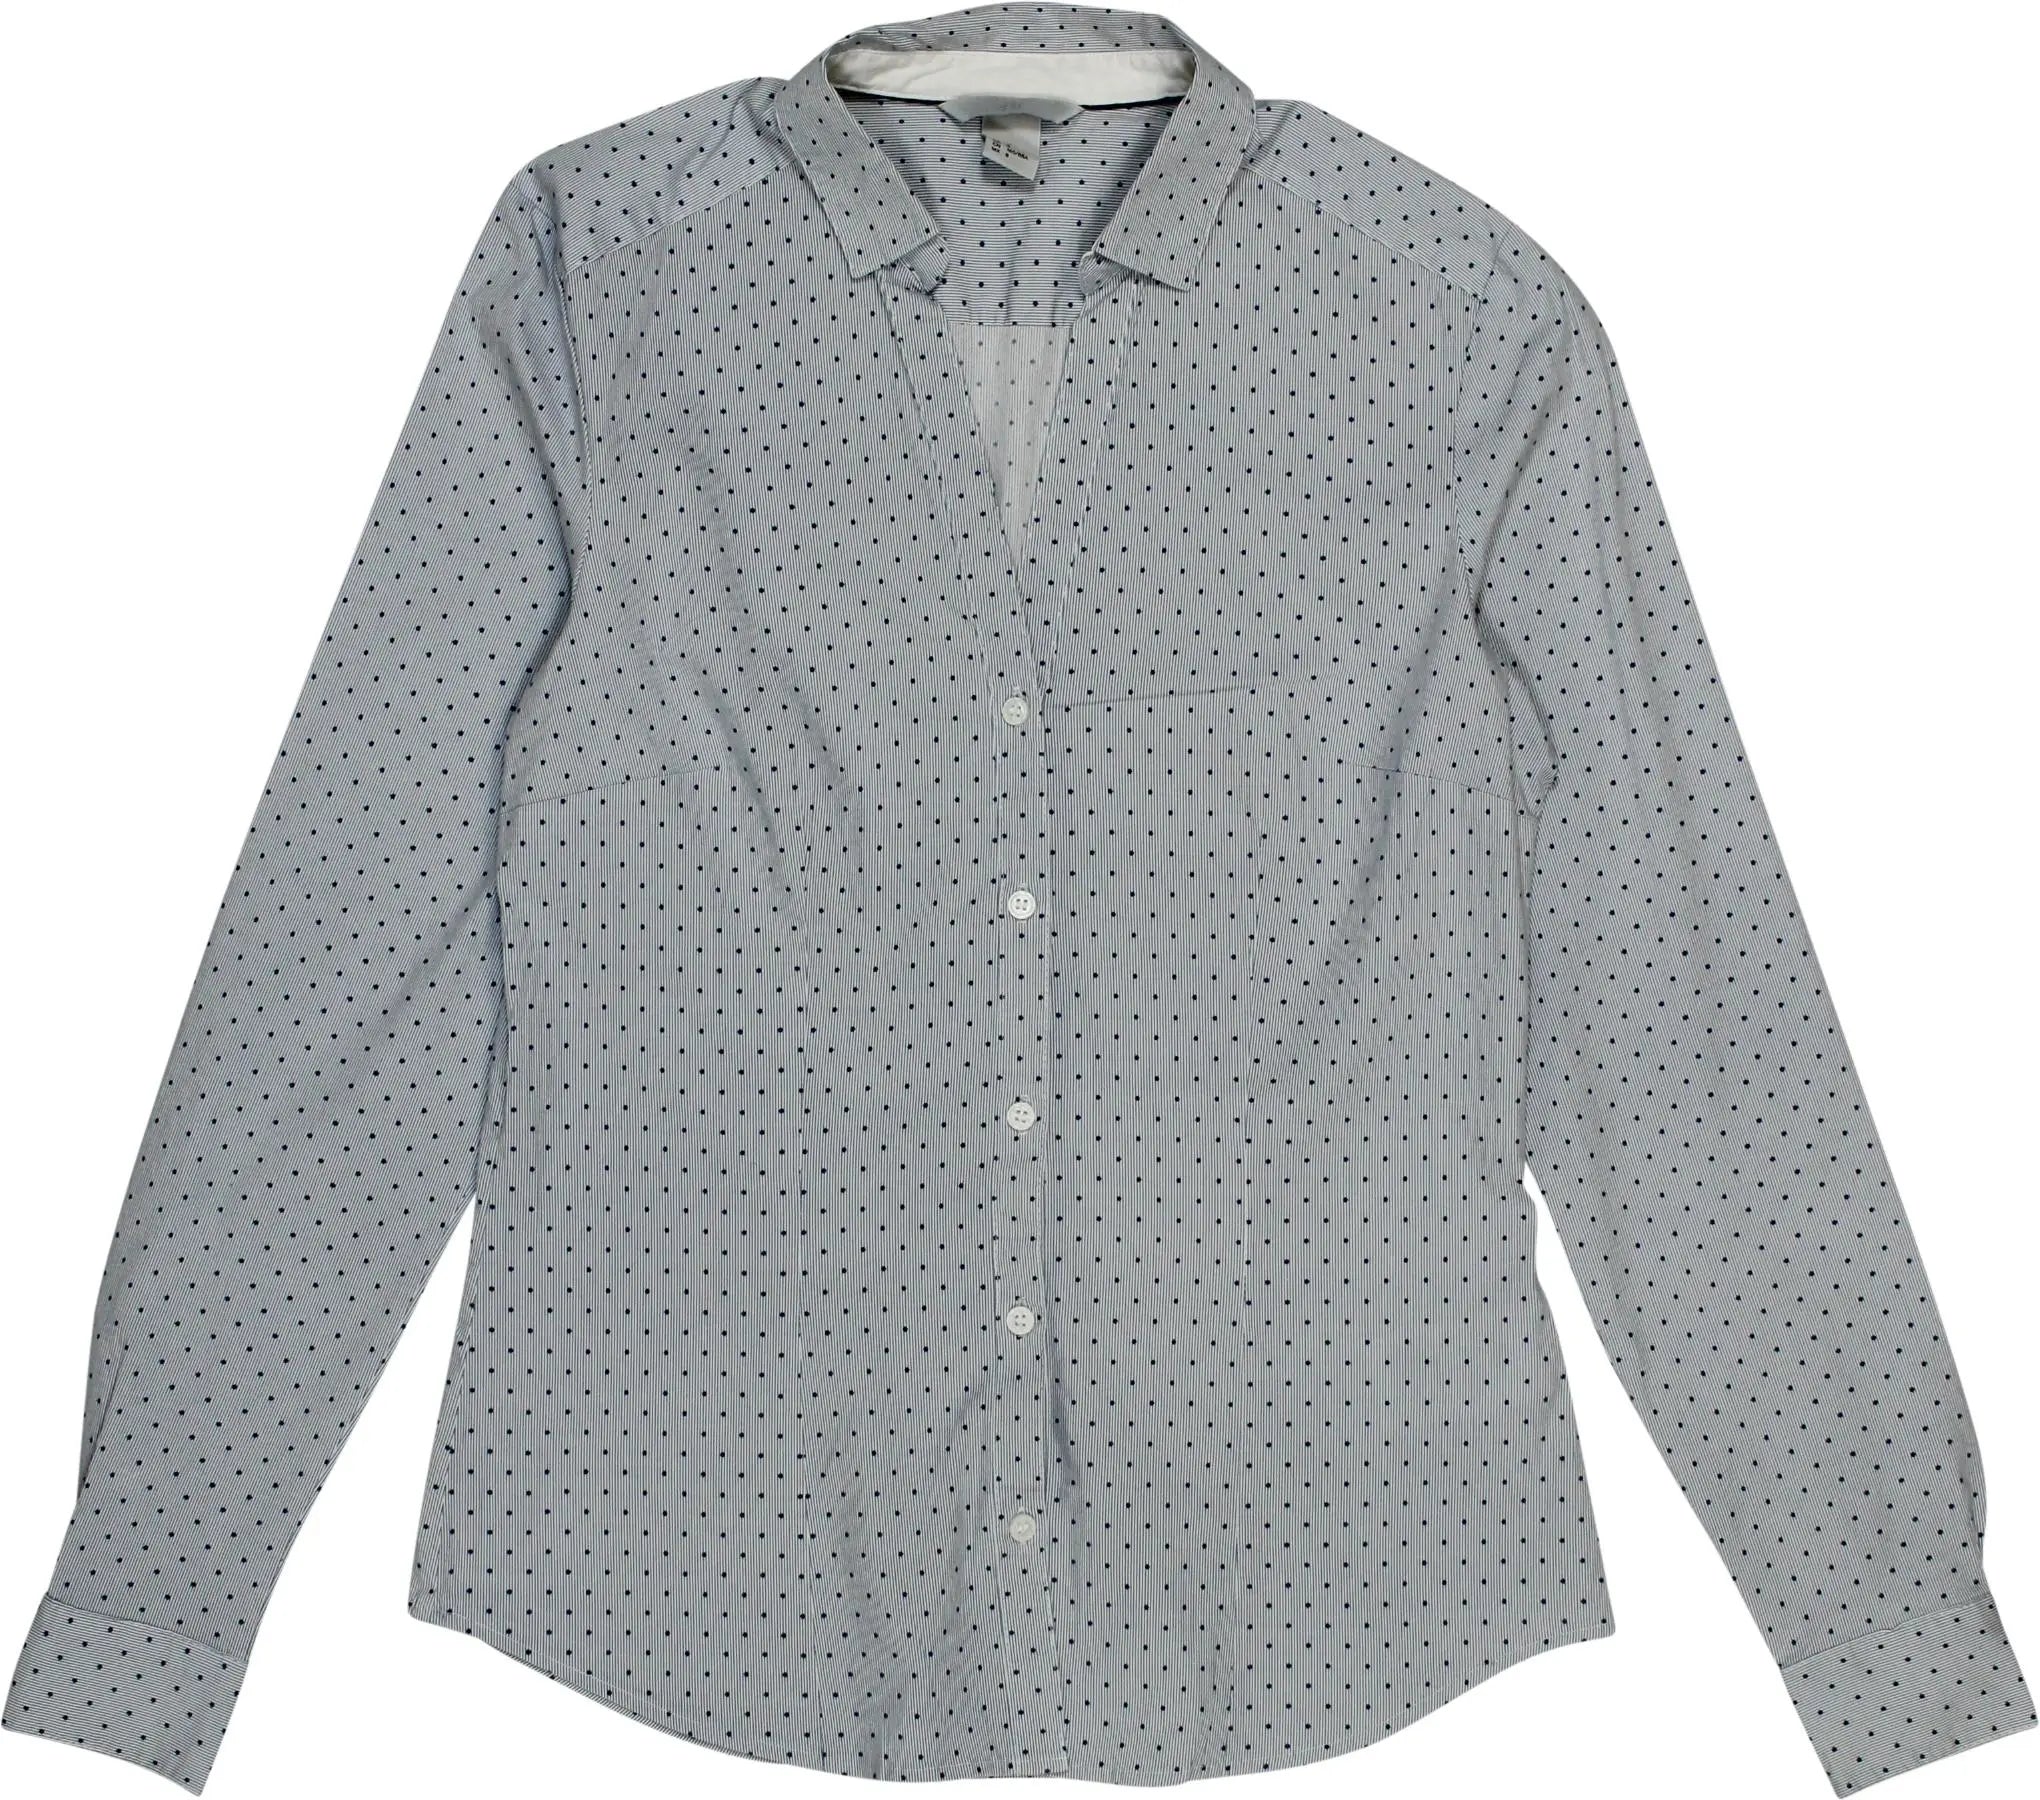 H&M - Polka Dot Blouse- ThriftTale.com - Vintage and second handclothing